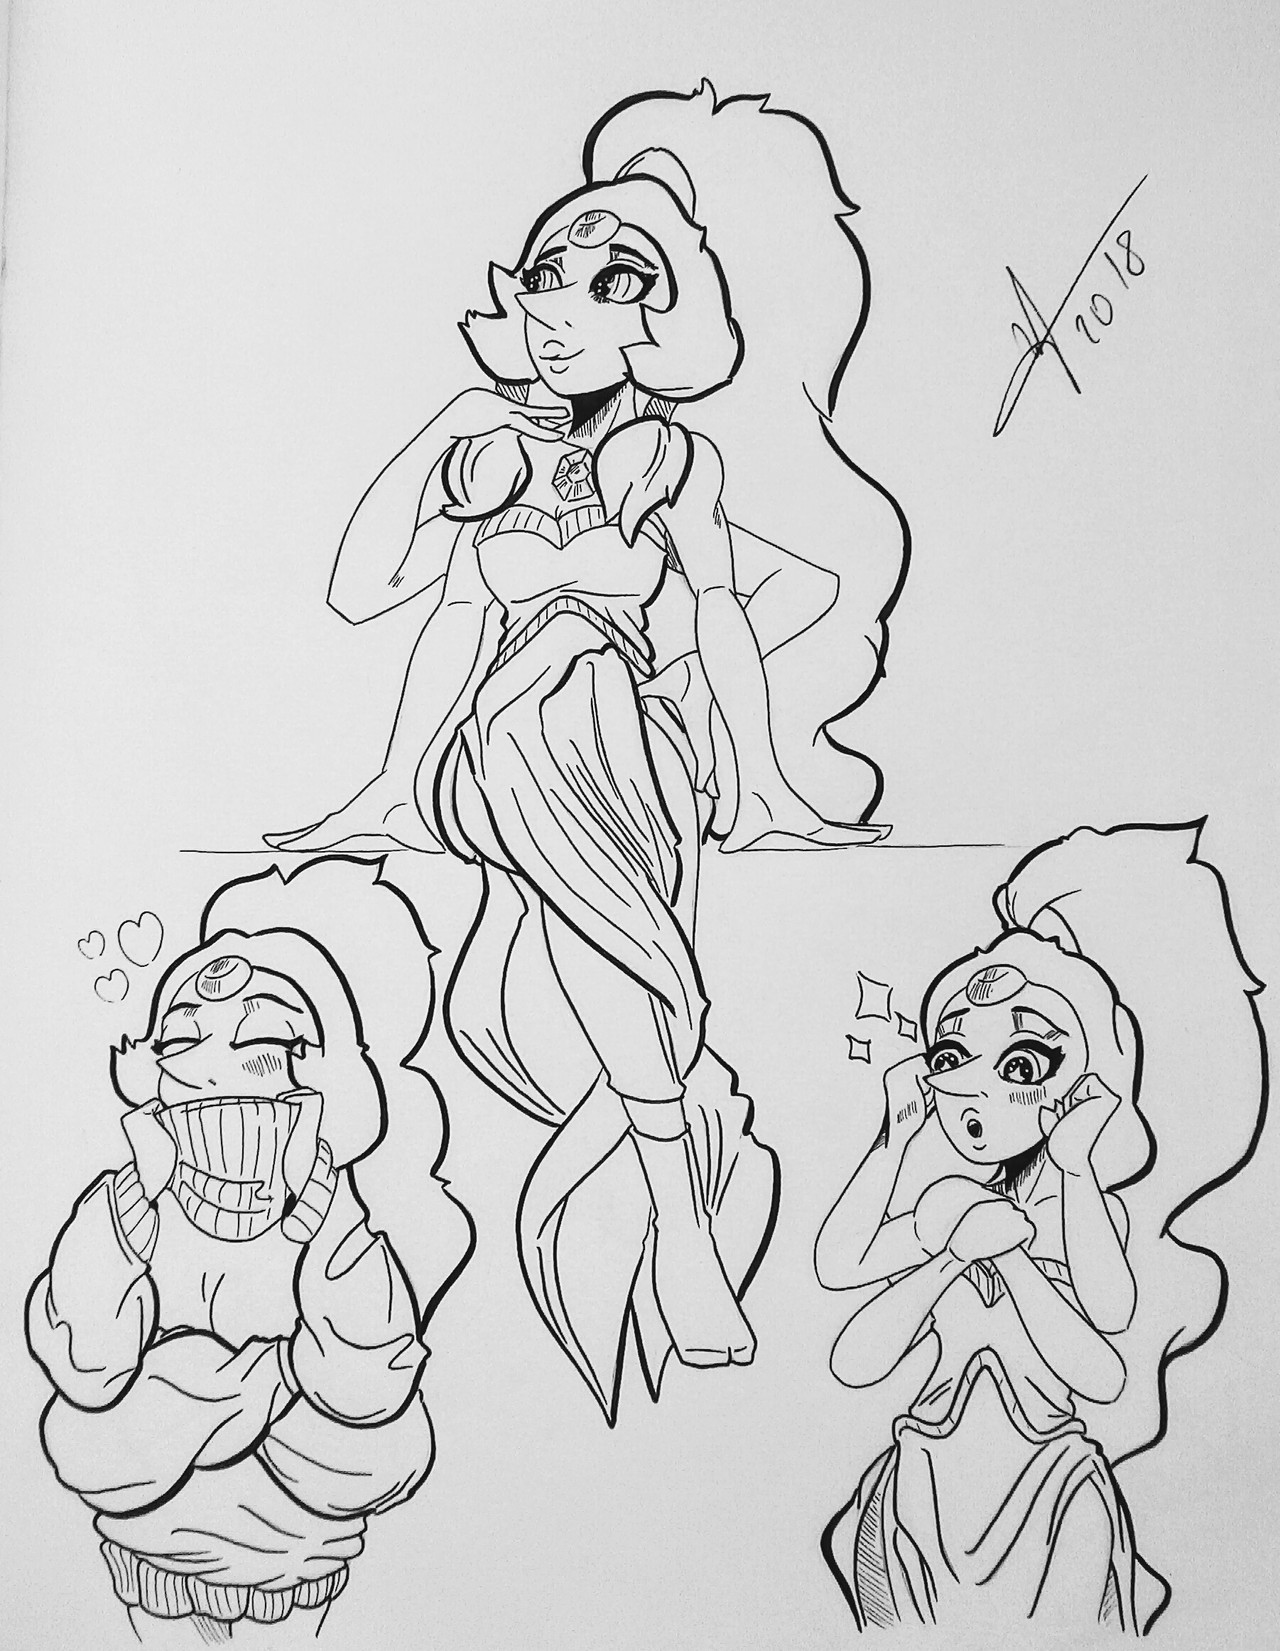 (reupload) Just some Opal sketches.